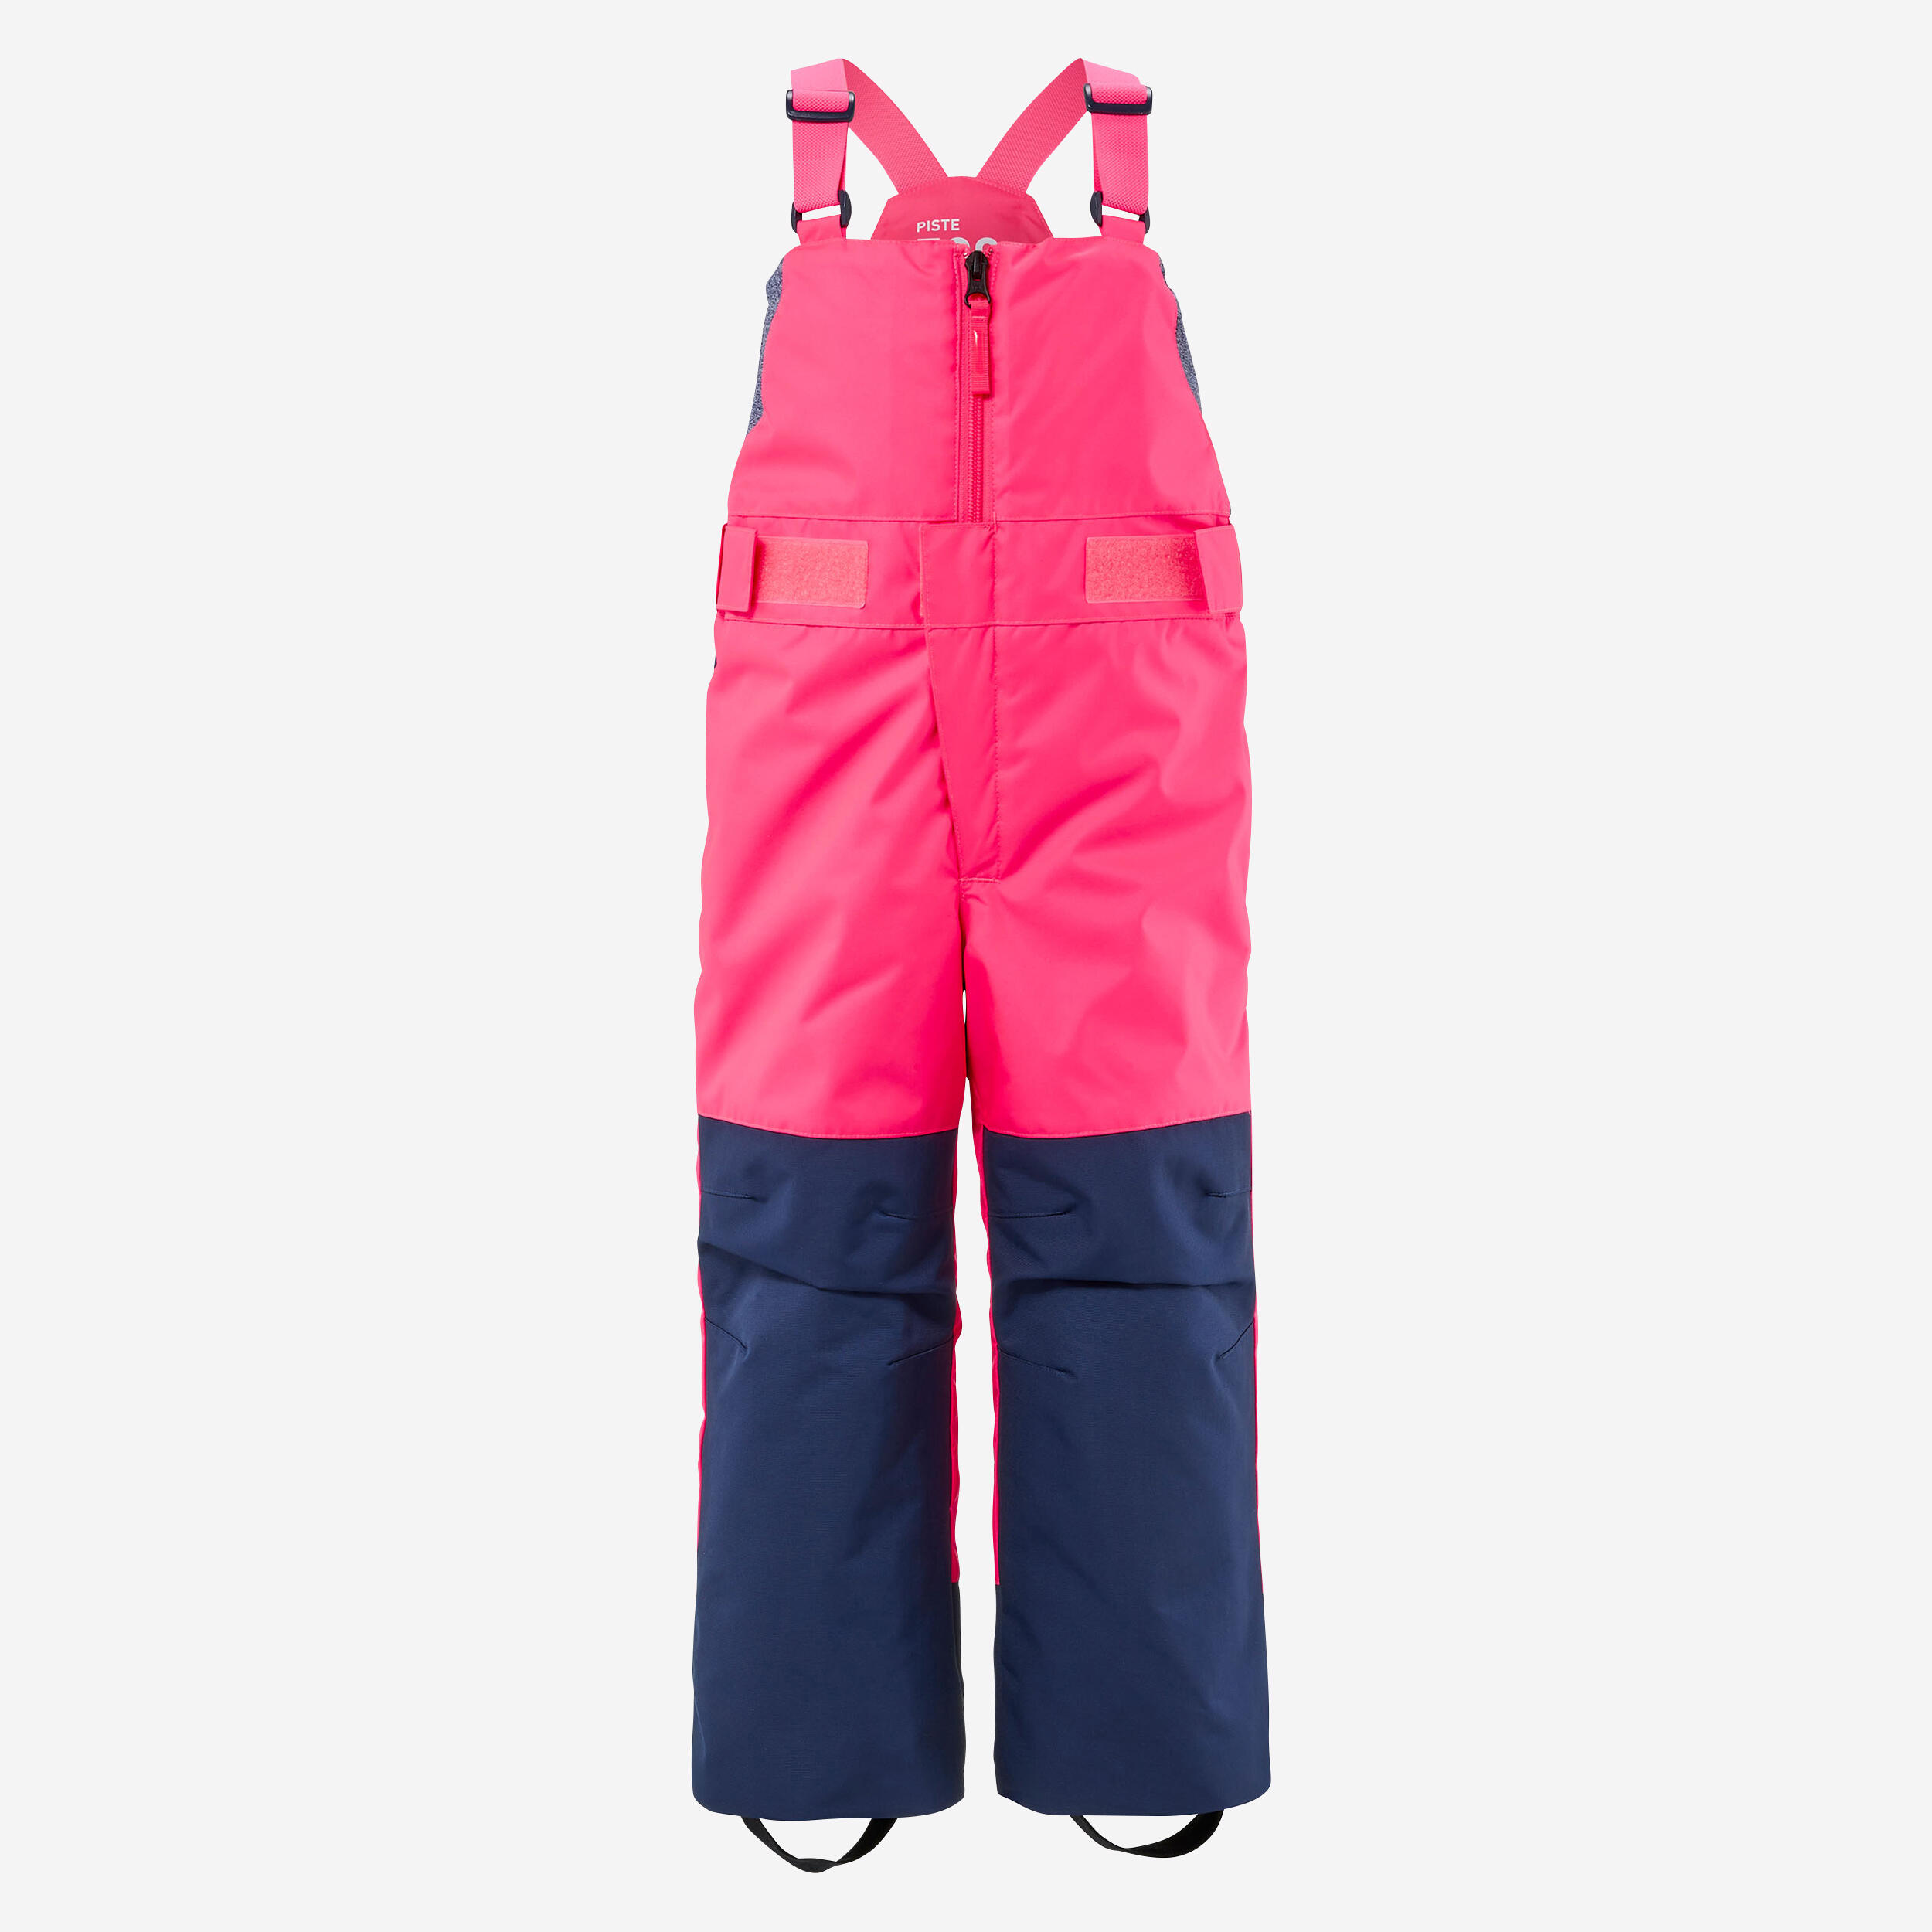 WEDZE KIDS’ WARM AND WATERPROOF SKI DUNGAREES - 500 PNF - NEON PINK AND NAVY 